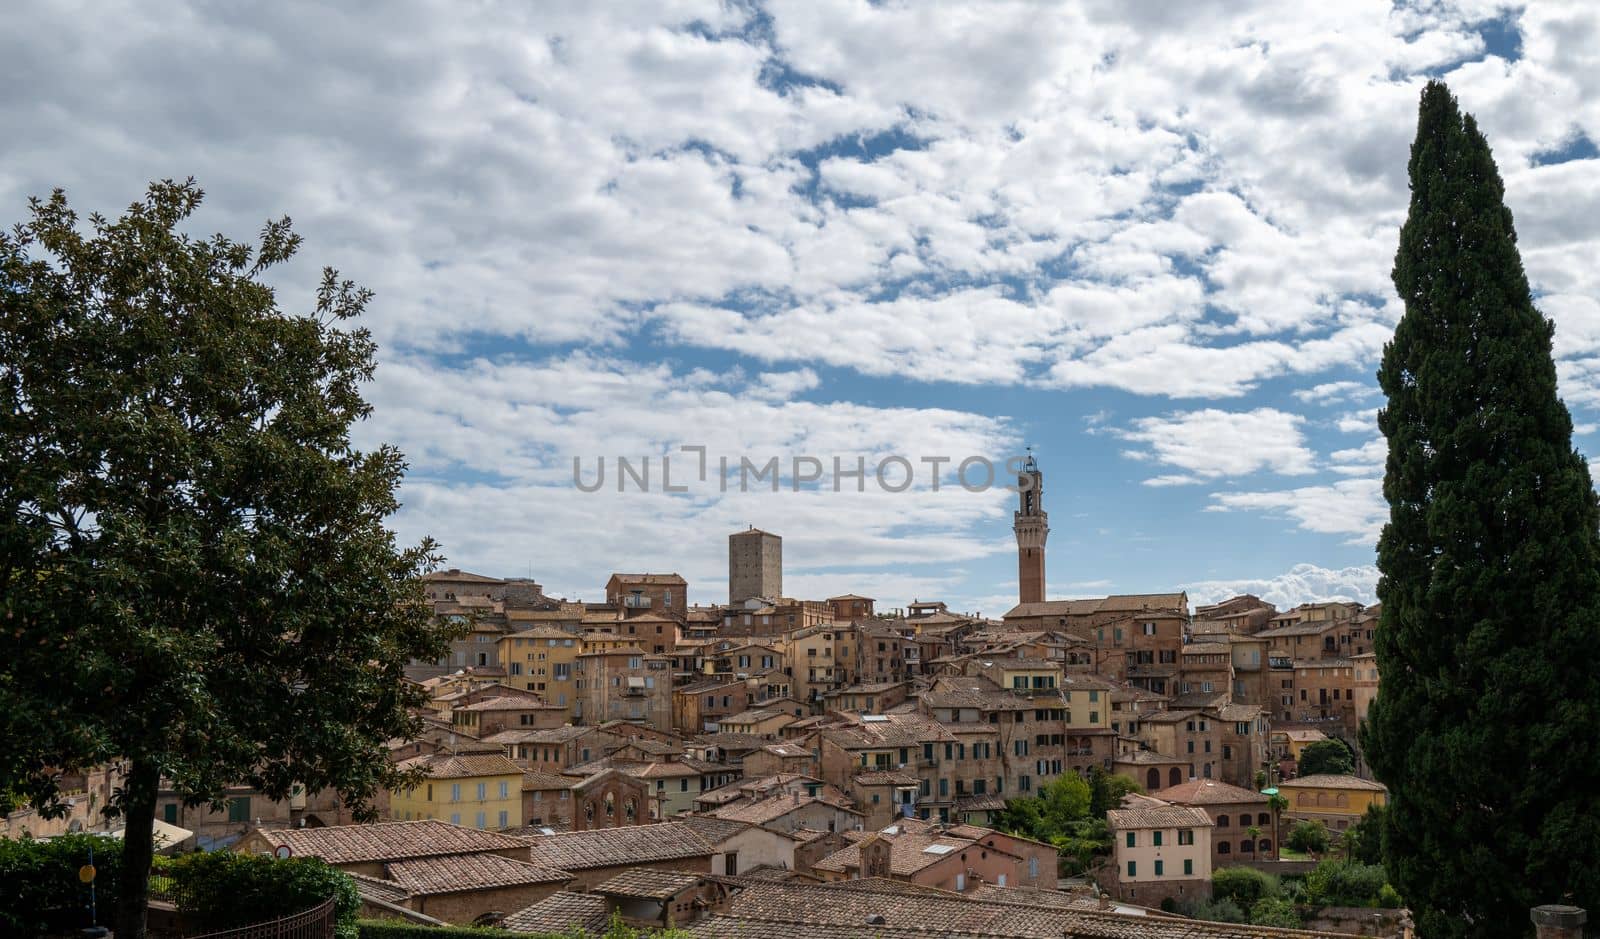 View of the historically important and popular Italian city in the heart of Tuscany, Siena.